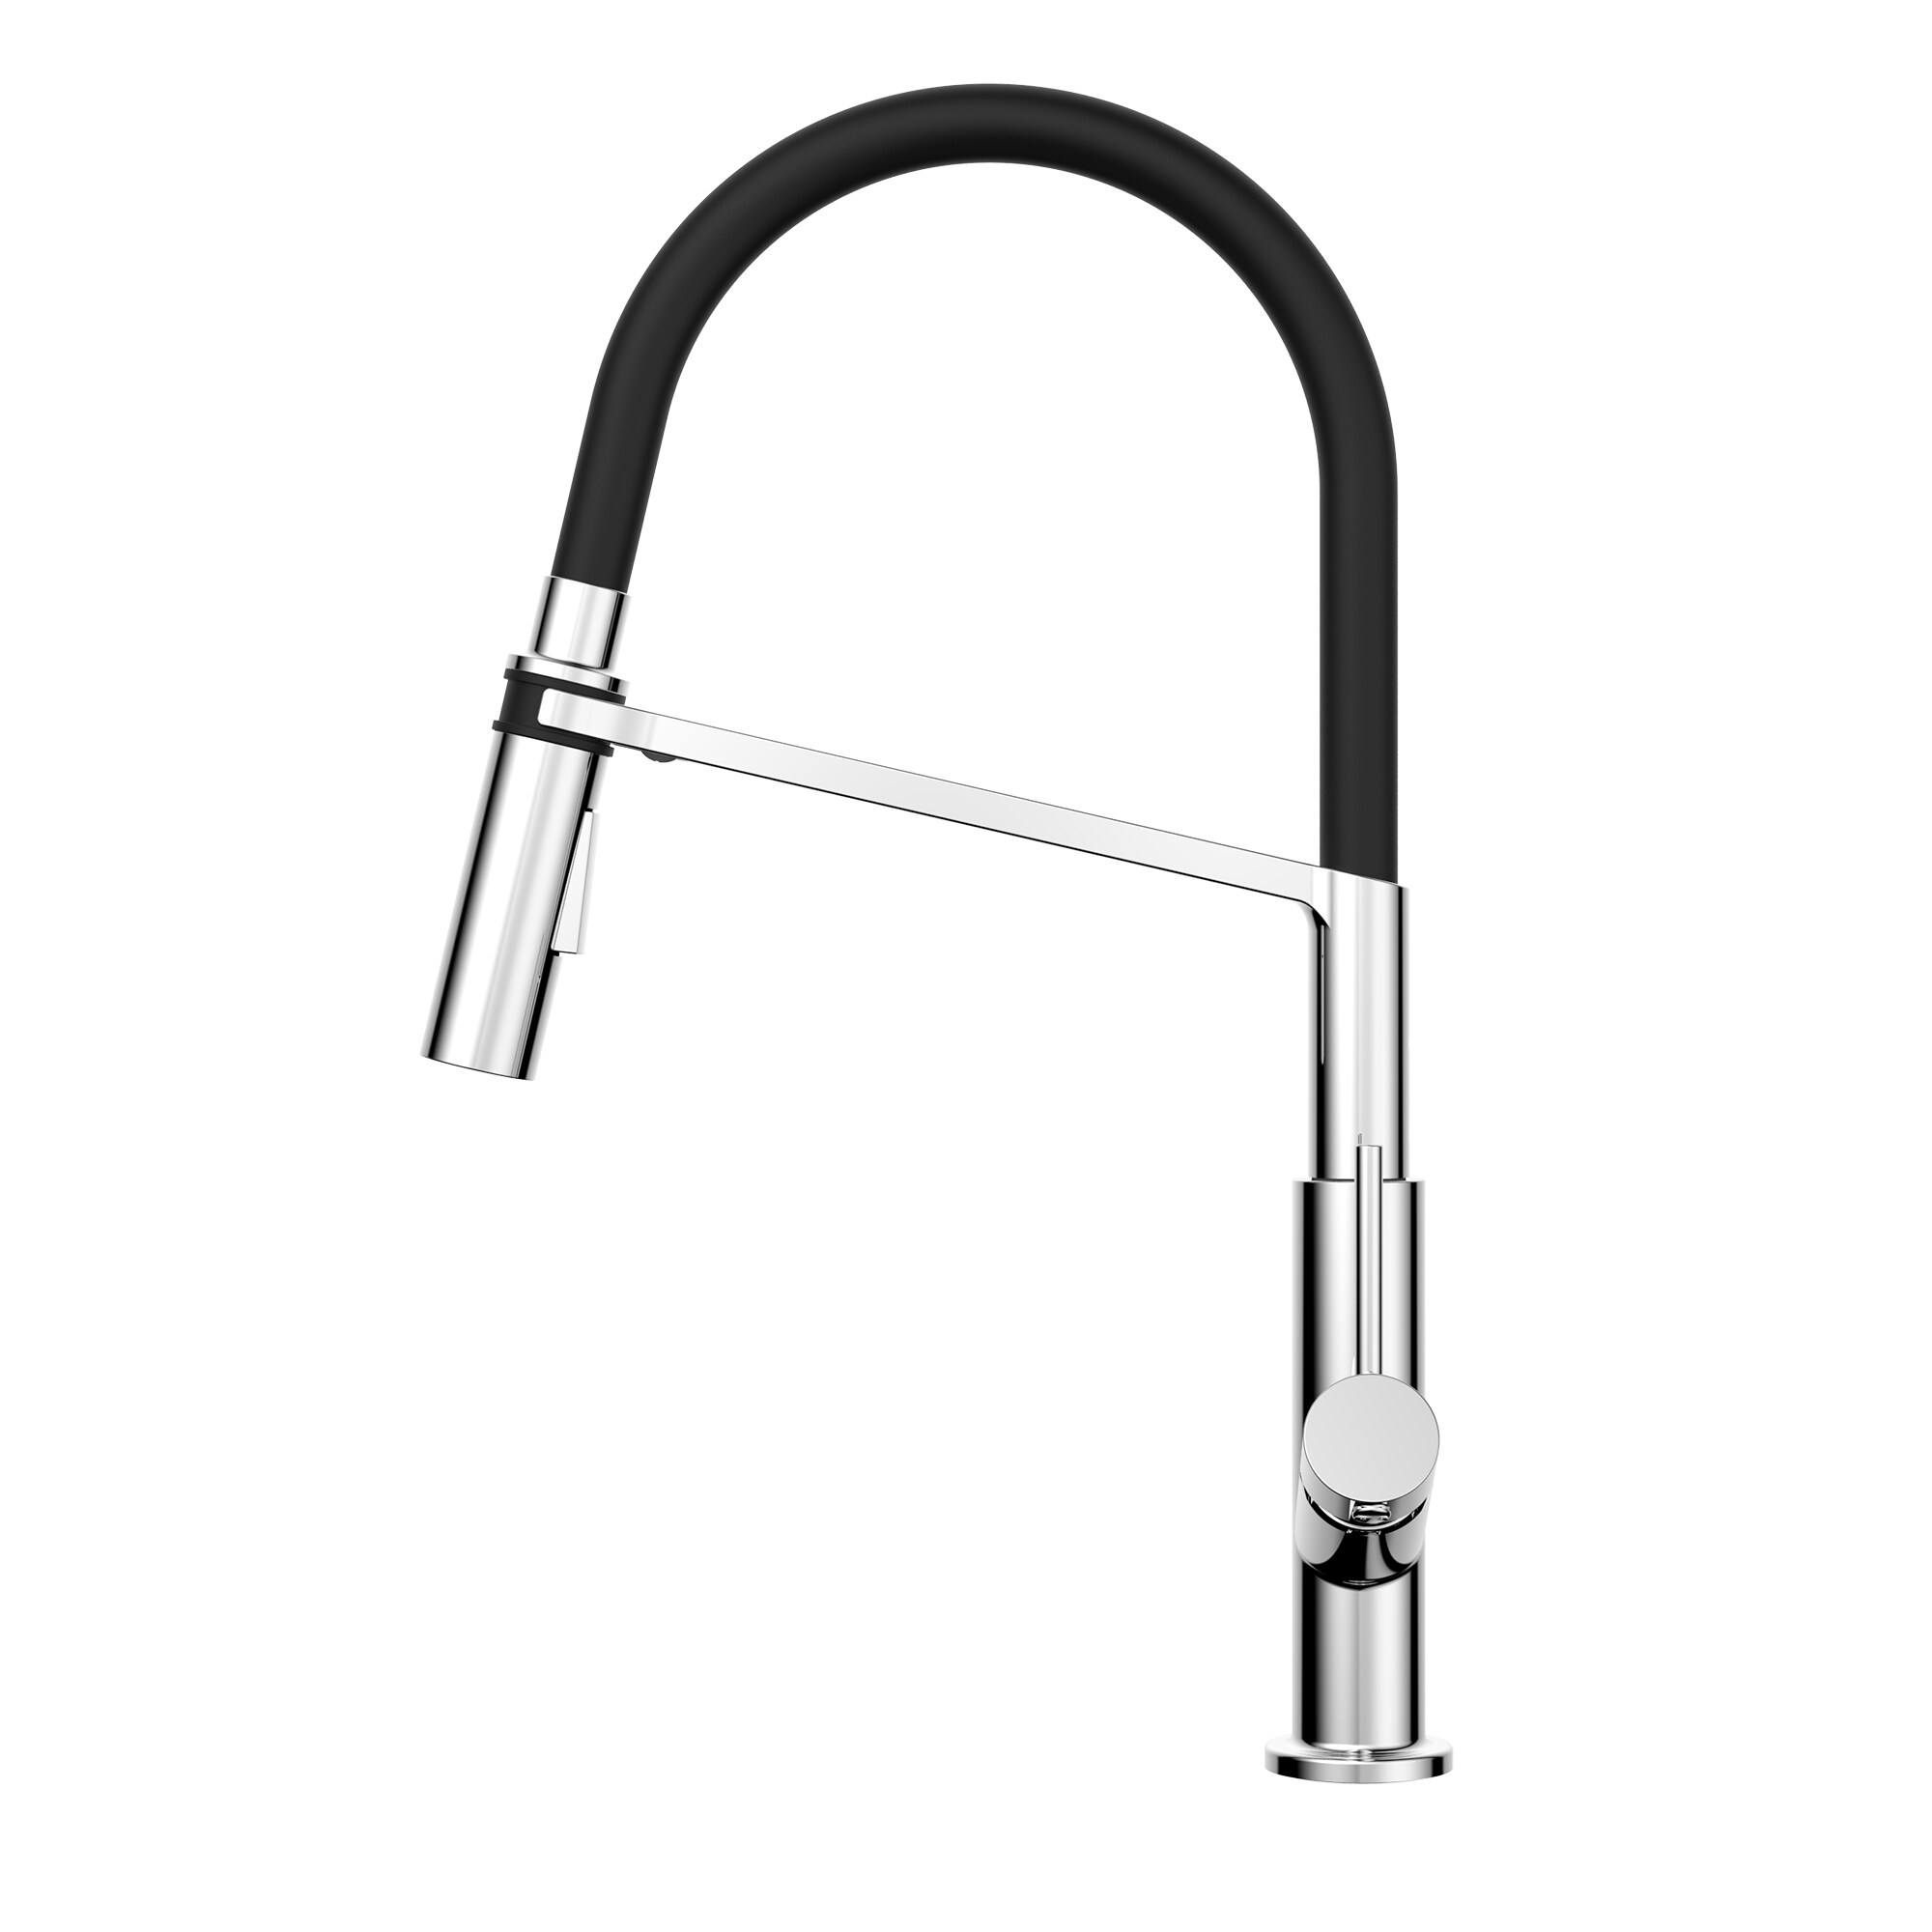 Belanger Magno Chrome Single Handle Pull-down Kitchen Faucet with Sprayer Function (Deck Plate Included)